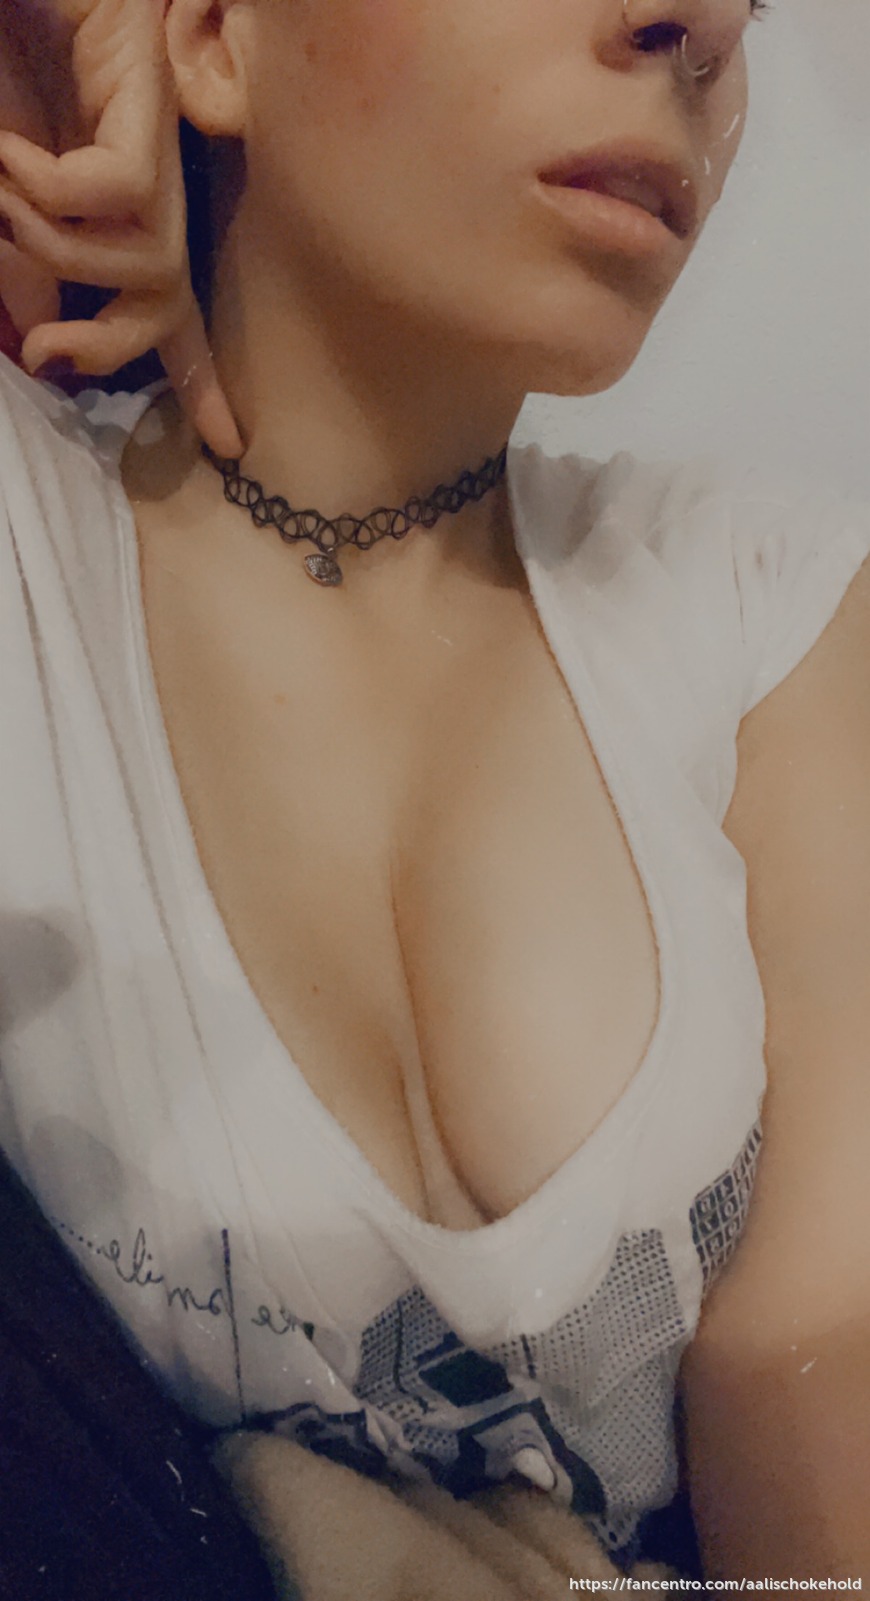 need more chokersâ€¦what you think daddy? 1